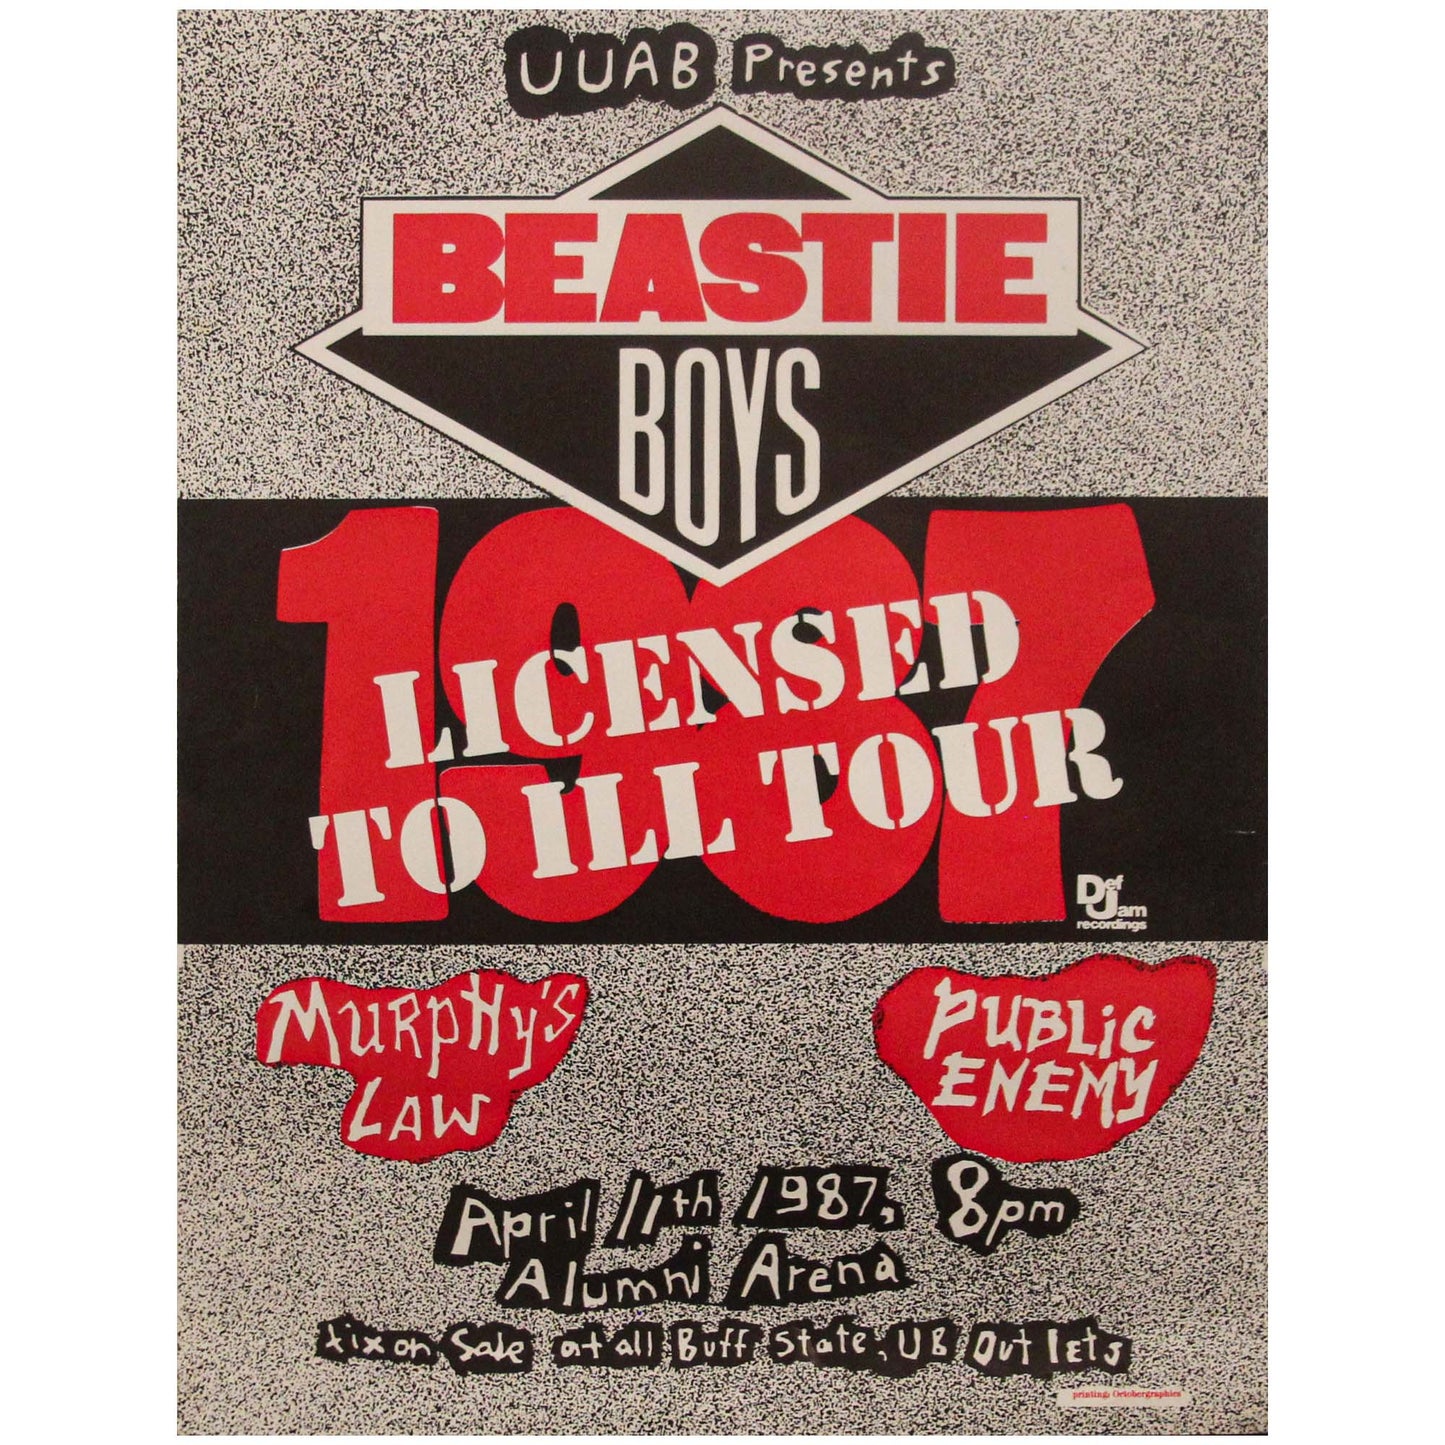 Beastie Boys 1987 - License to Ill Tour Poster Zoom Out View